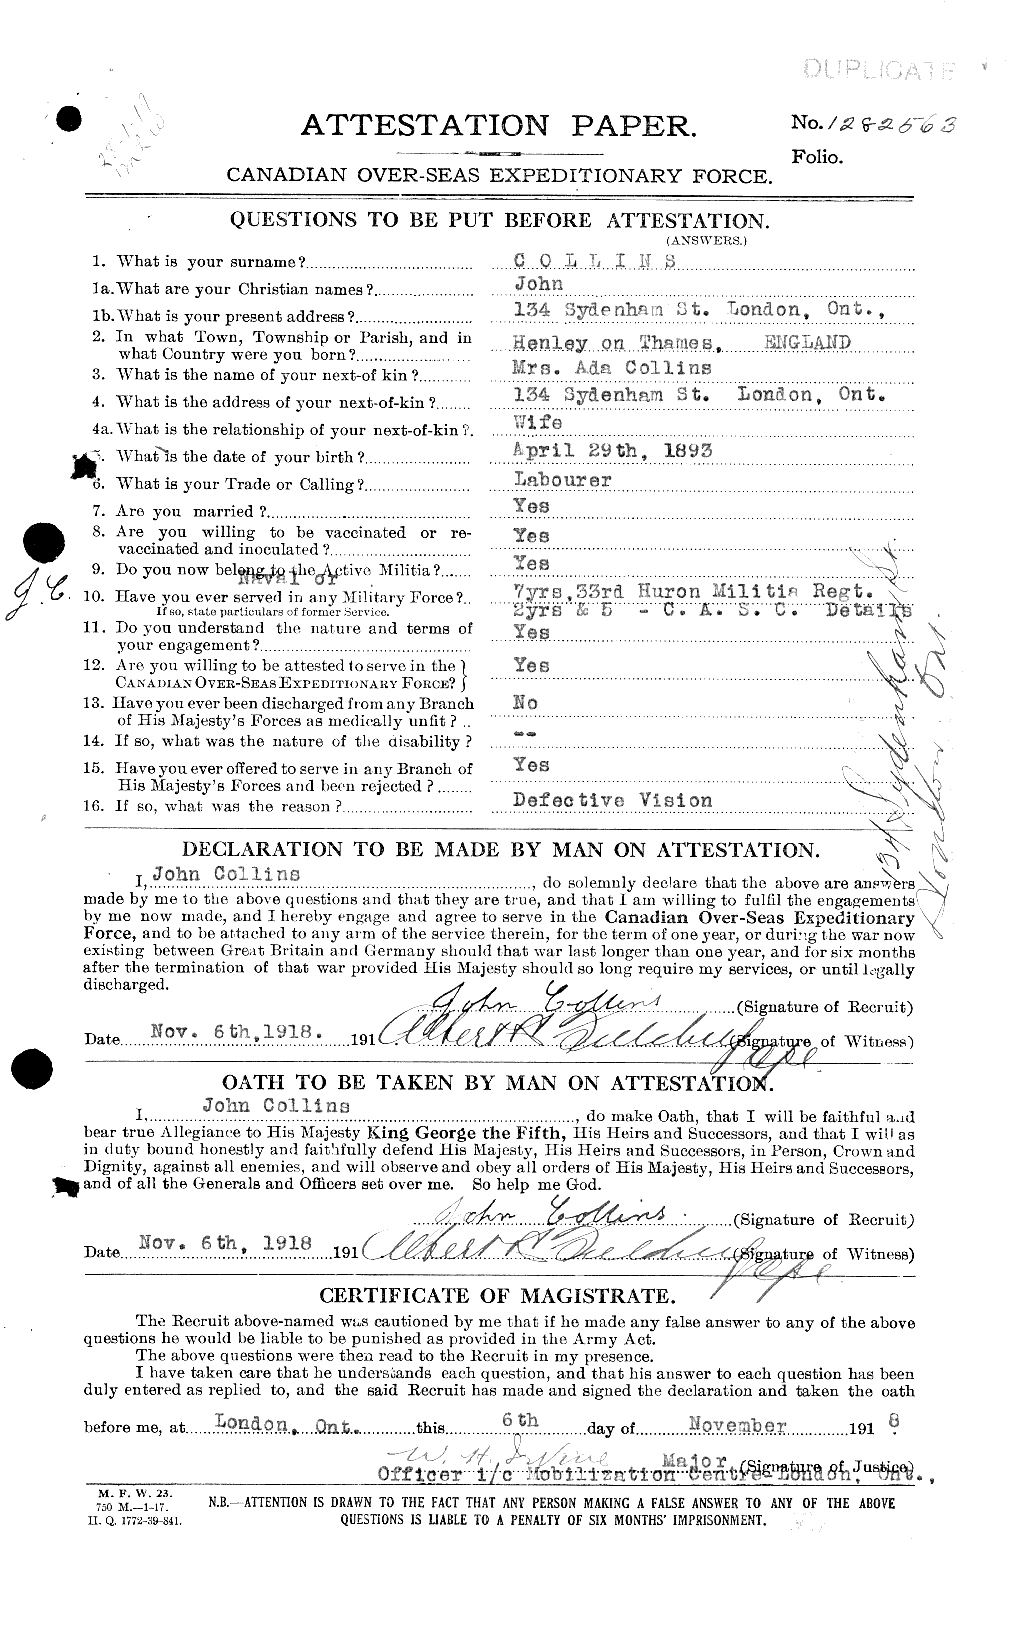 Personnel Records of the First World War - CEF 037989a